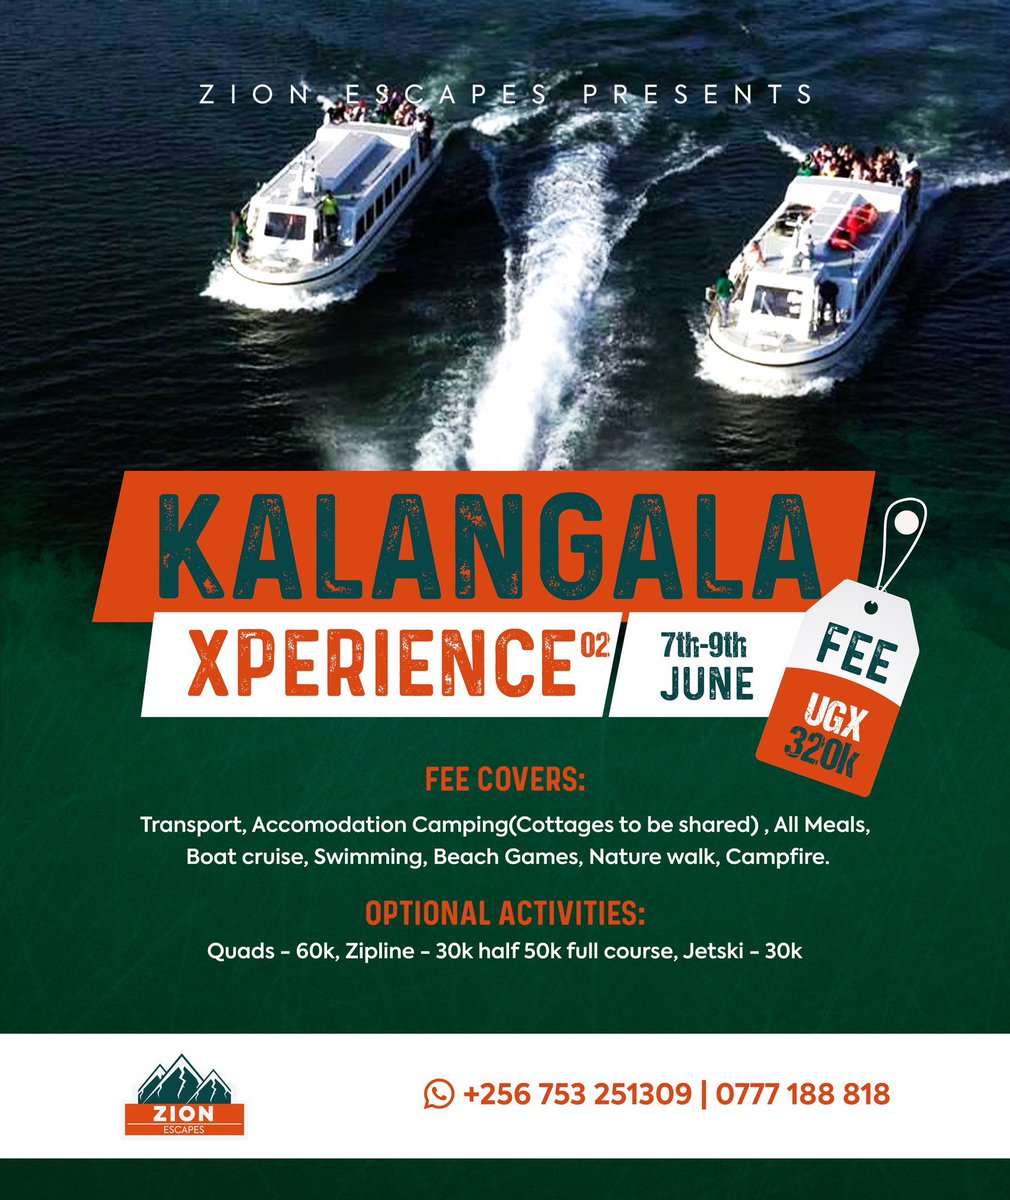 Come 7th to 9th June we are heading for the #KalangalaExperience with @ZionEscapes1. Tax UGX 320k only Mark the dates you ought not to miss on the fun, more details are on the poster